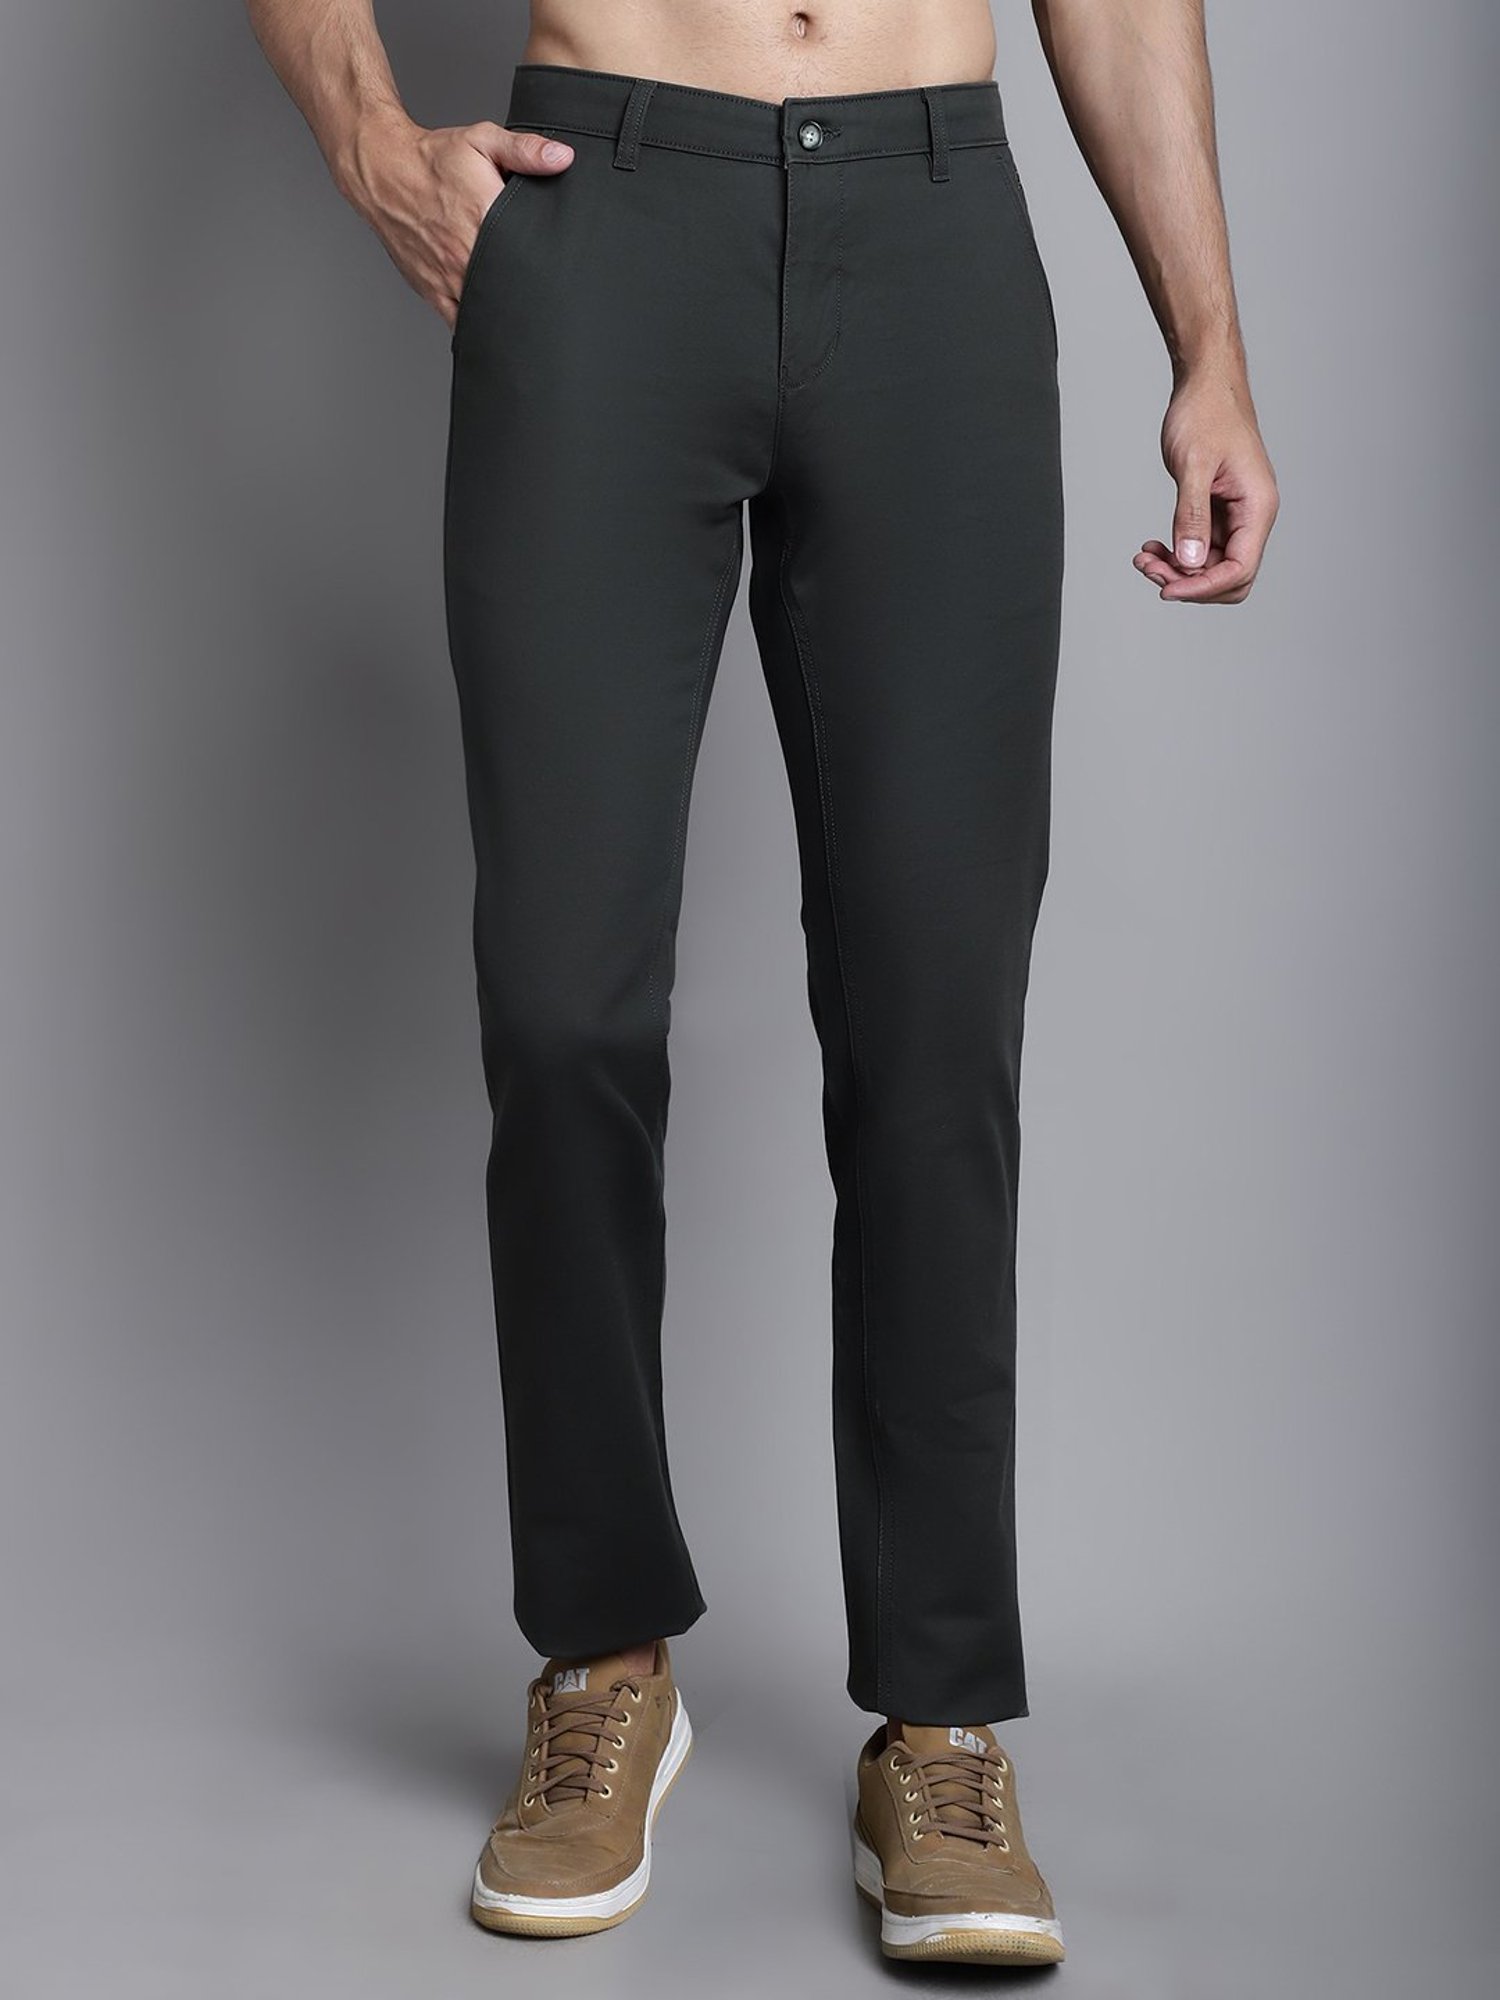 Buy Trousers Online In India